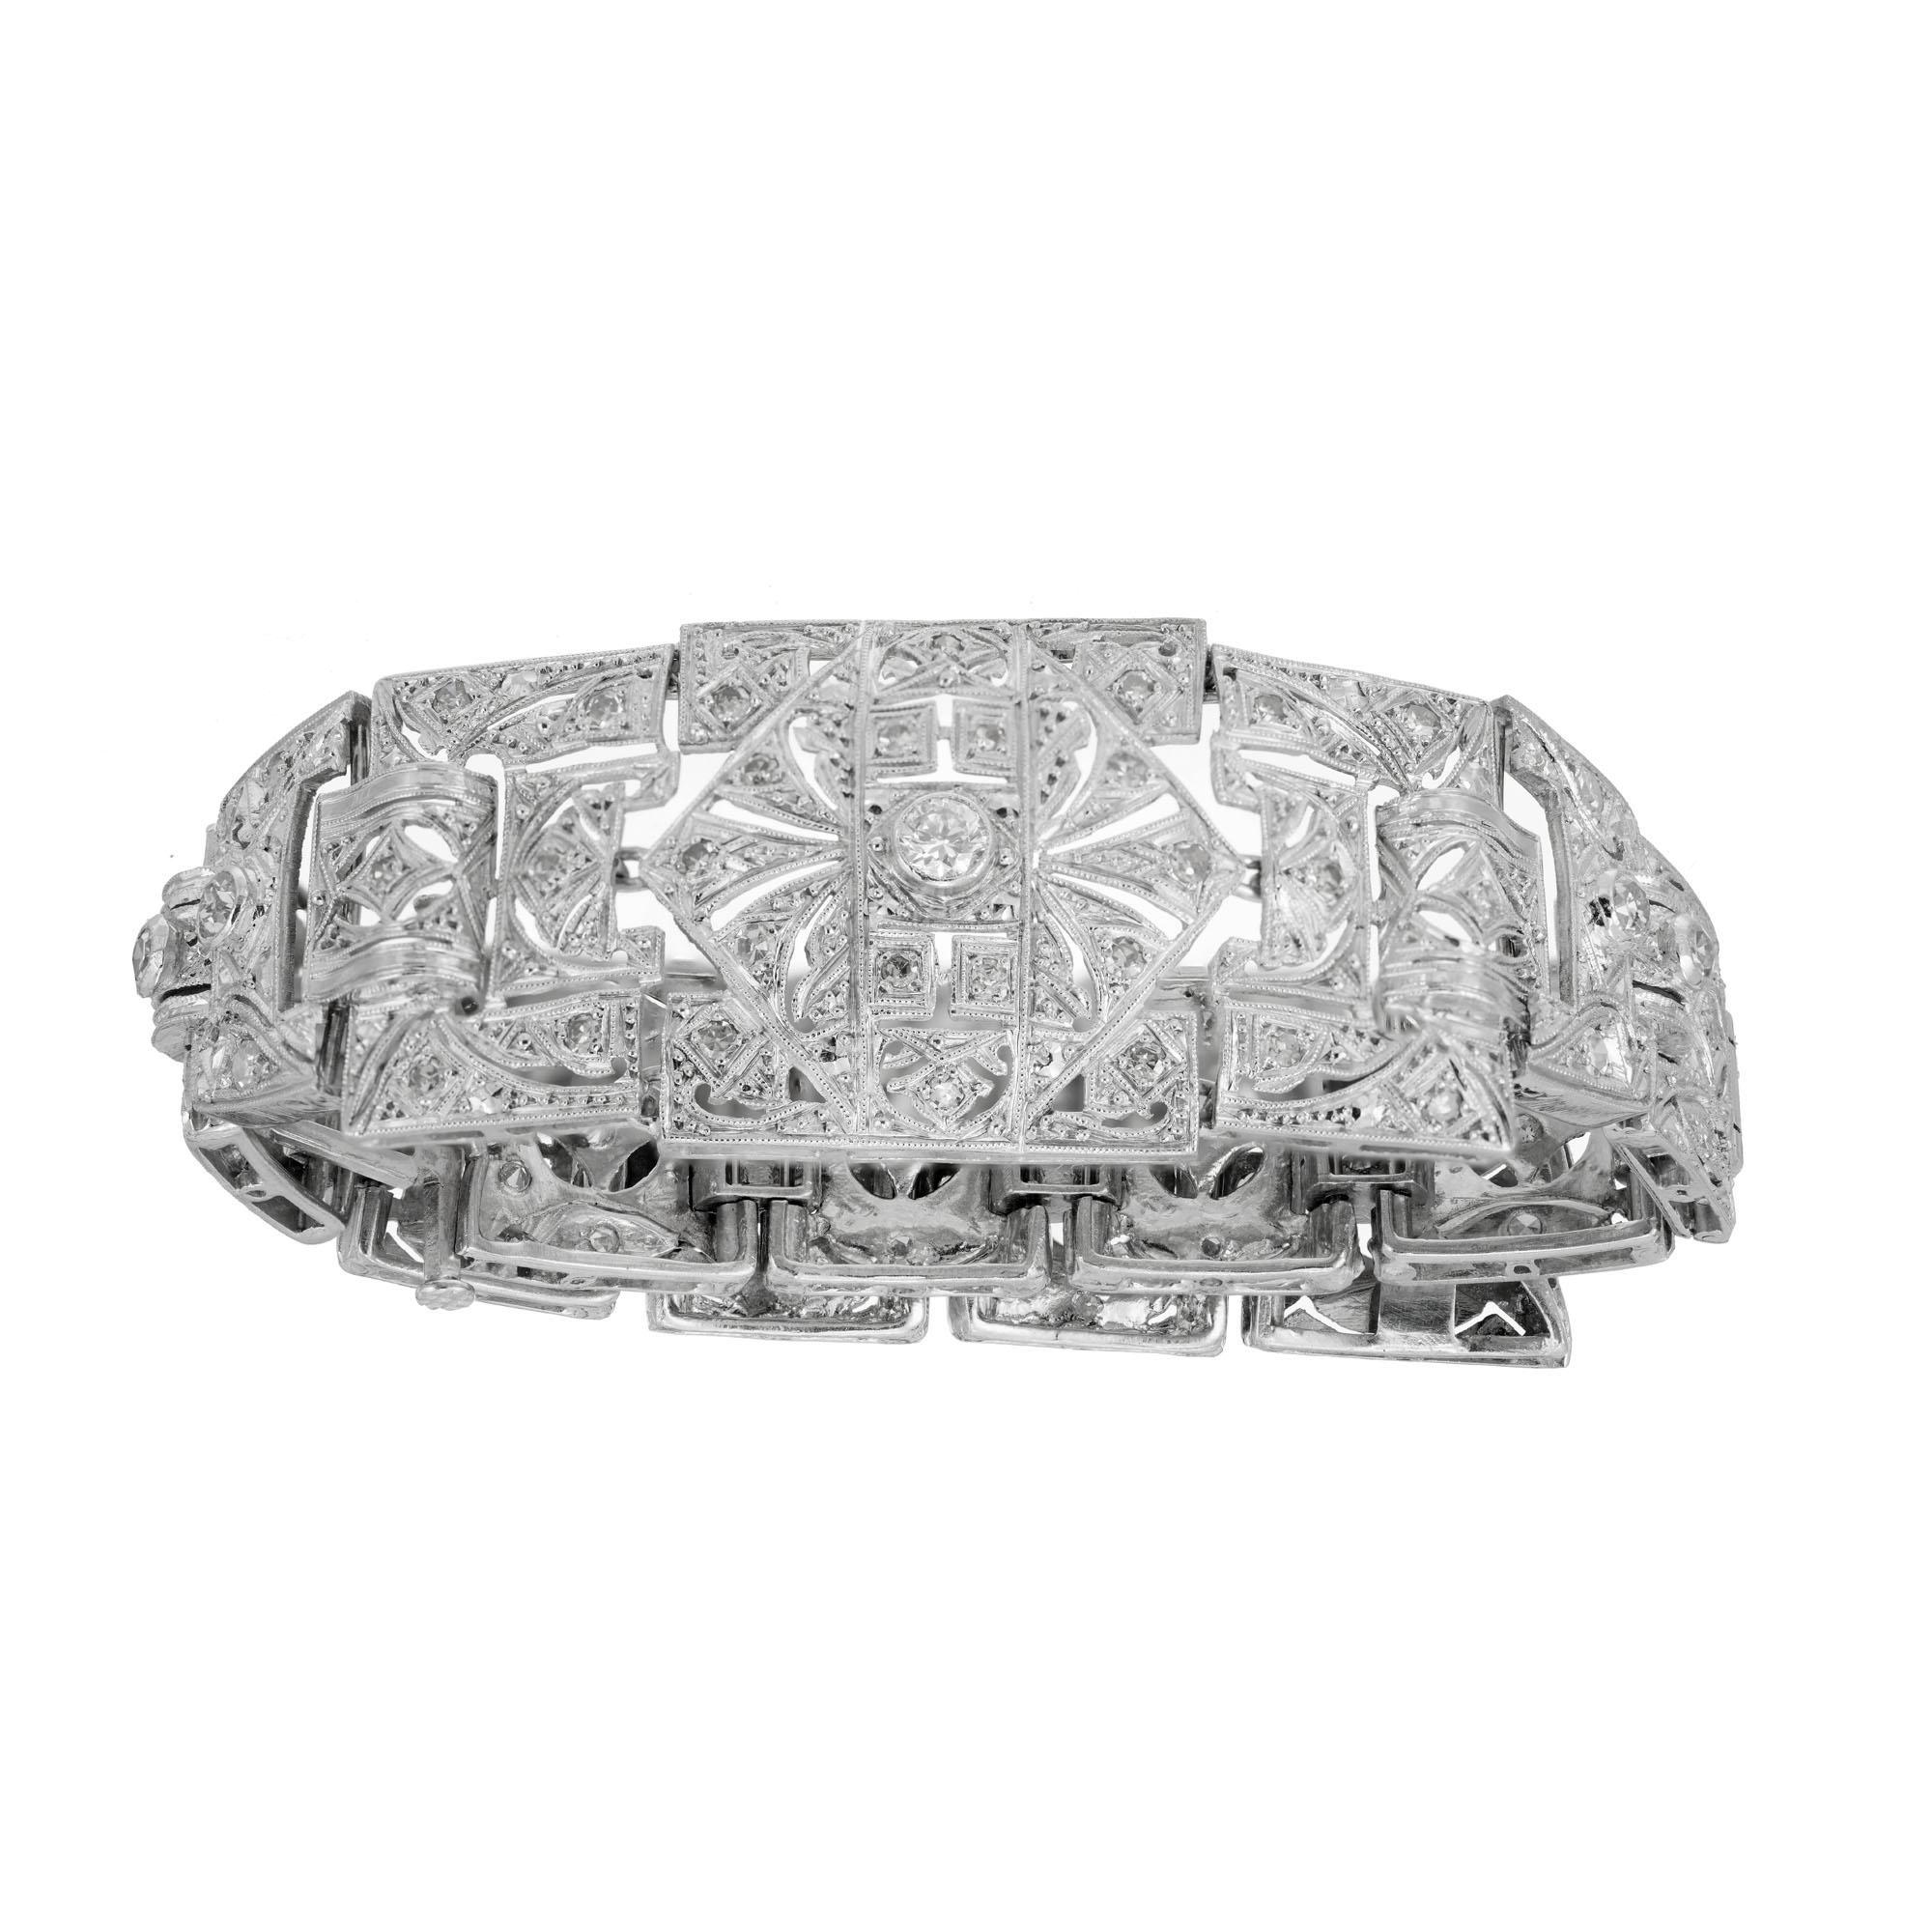 1920's Art Deco hinged link Platinum diamond bracelet. 63 round hand bead set diamonds set in platinum with pierced tops. Circa 1920's. 7.75 inches in length. 

1 brilliant cut diamond, approx. total weight .11cts. 
62 transitional single cut